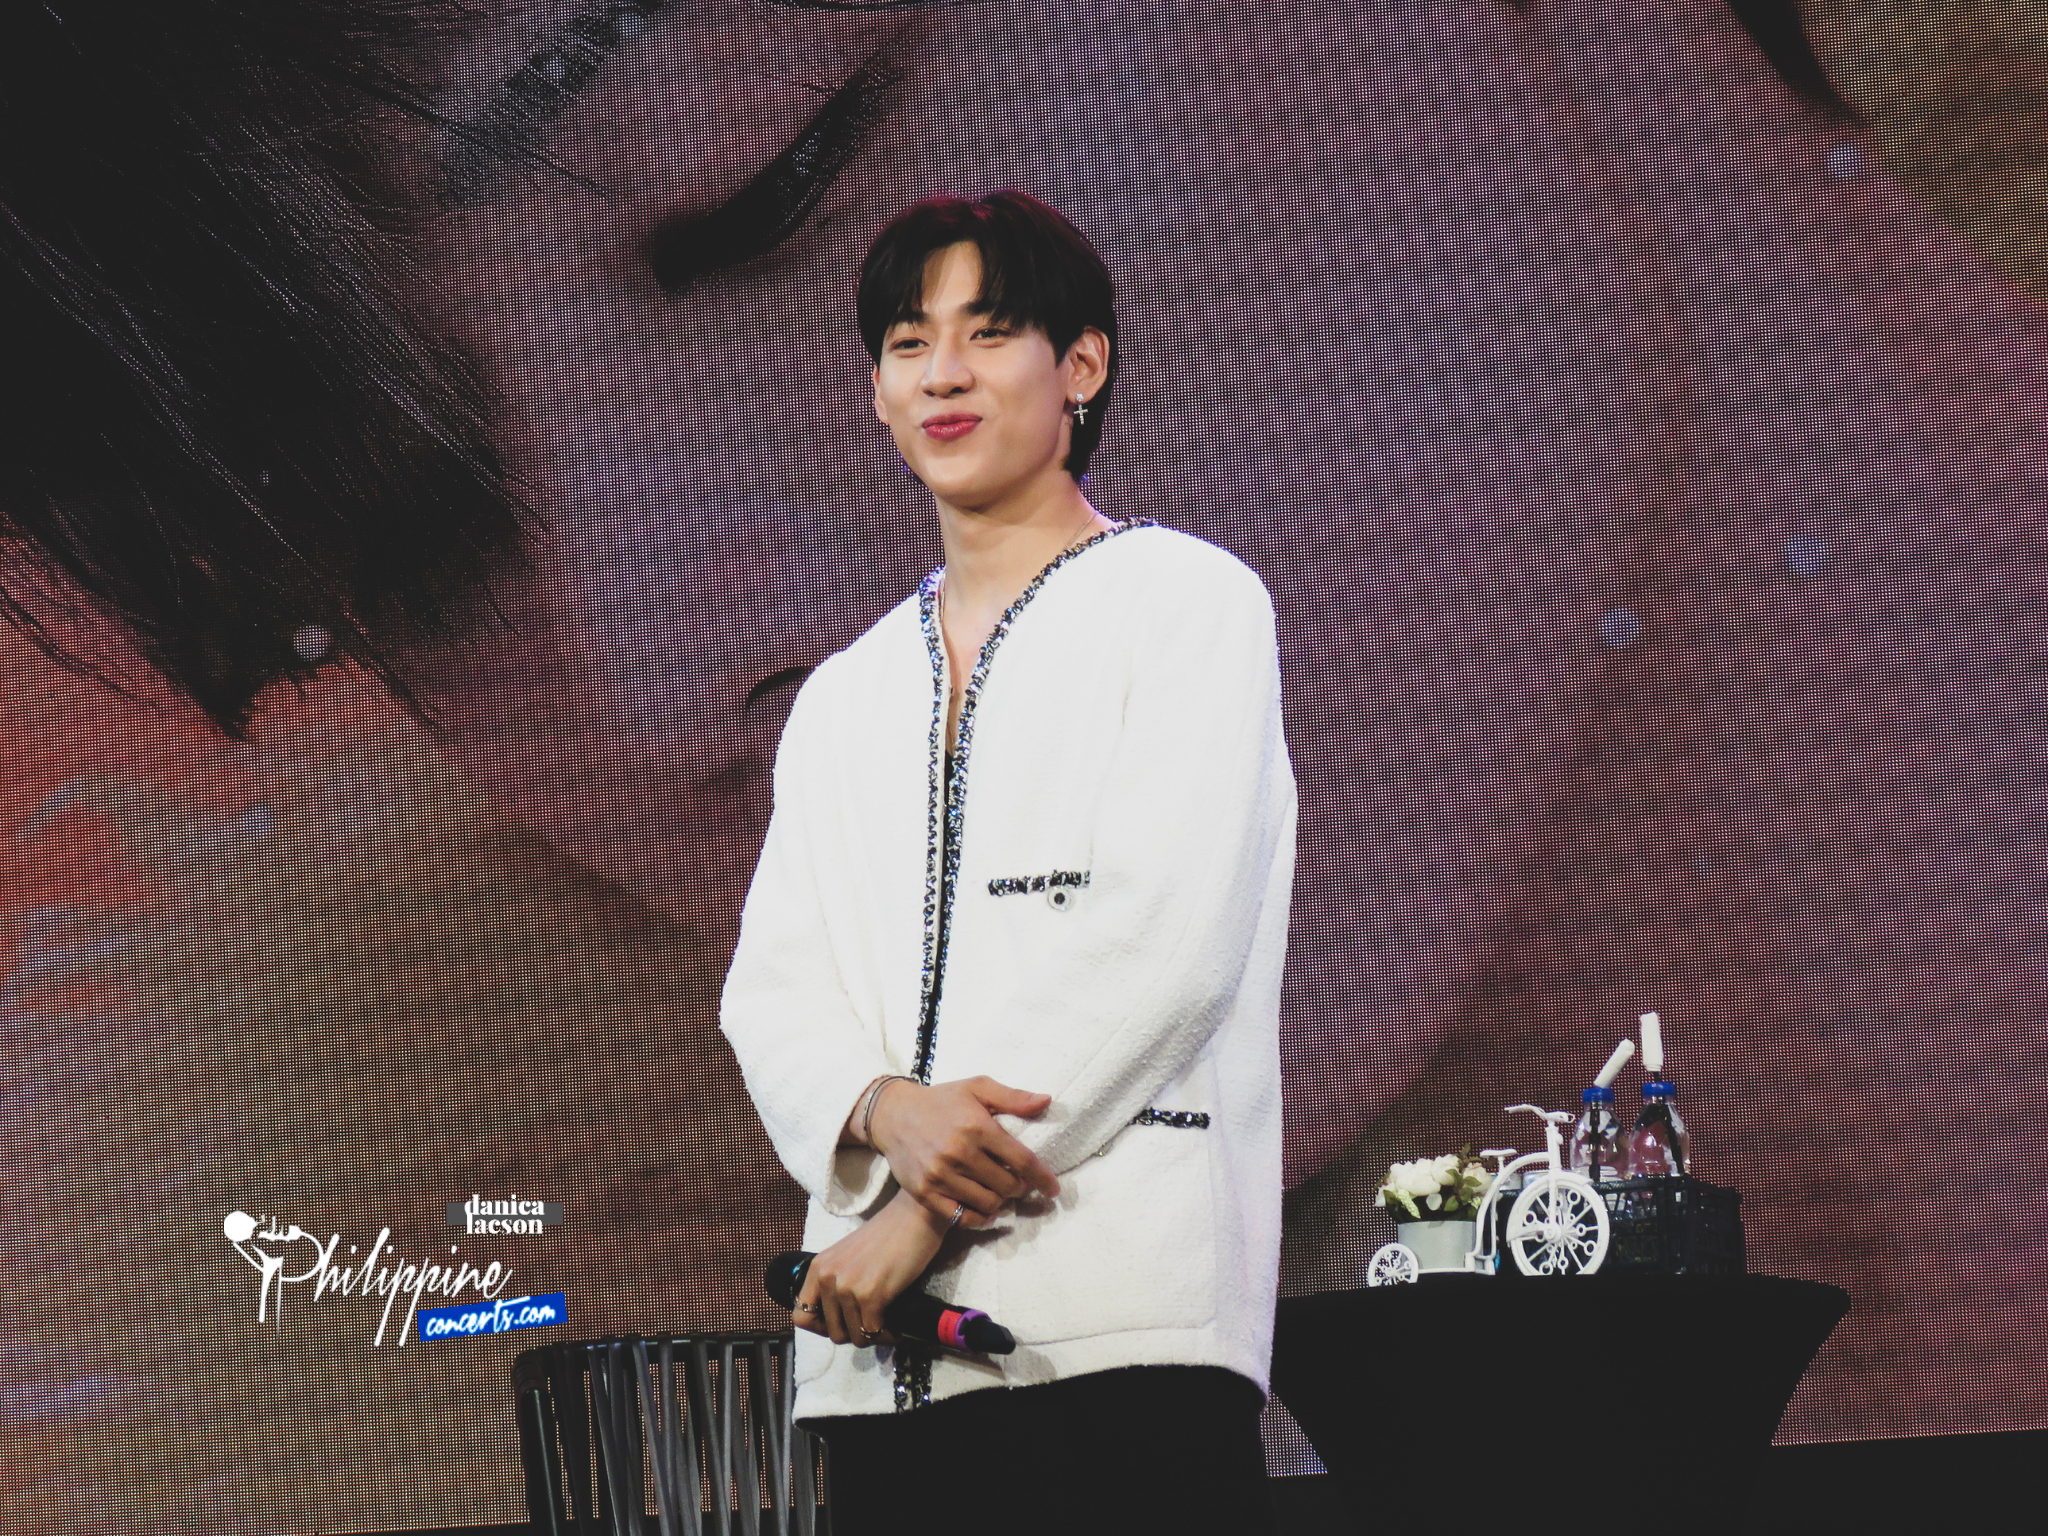 BamBam Fansign Press Conference